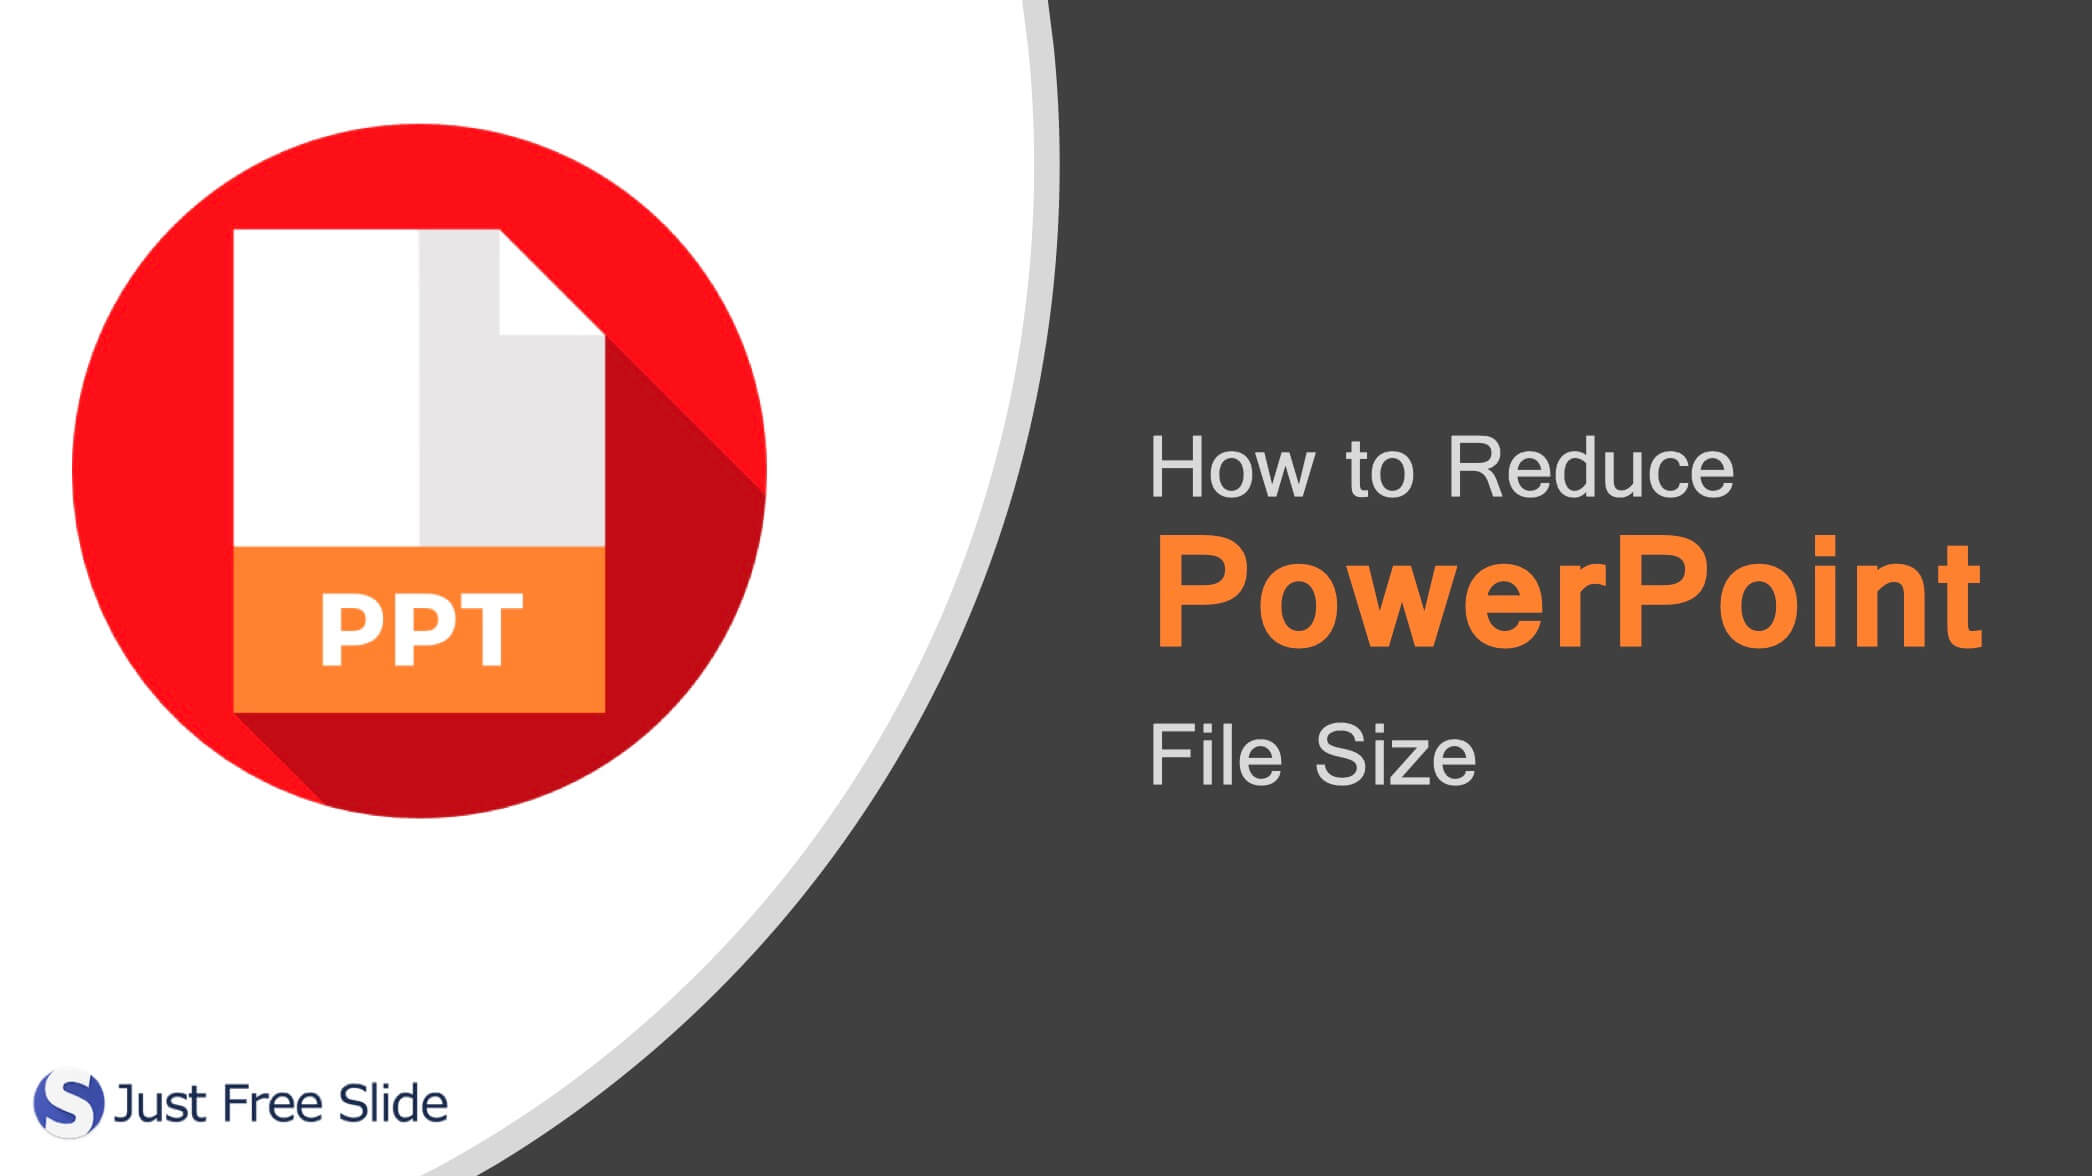 How to Reduce PowerPoint File Size